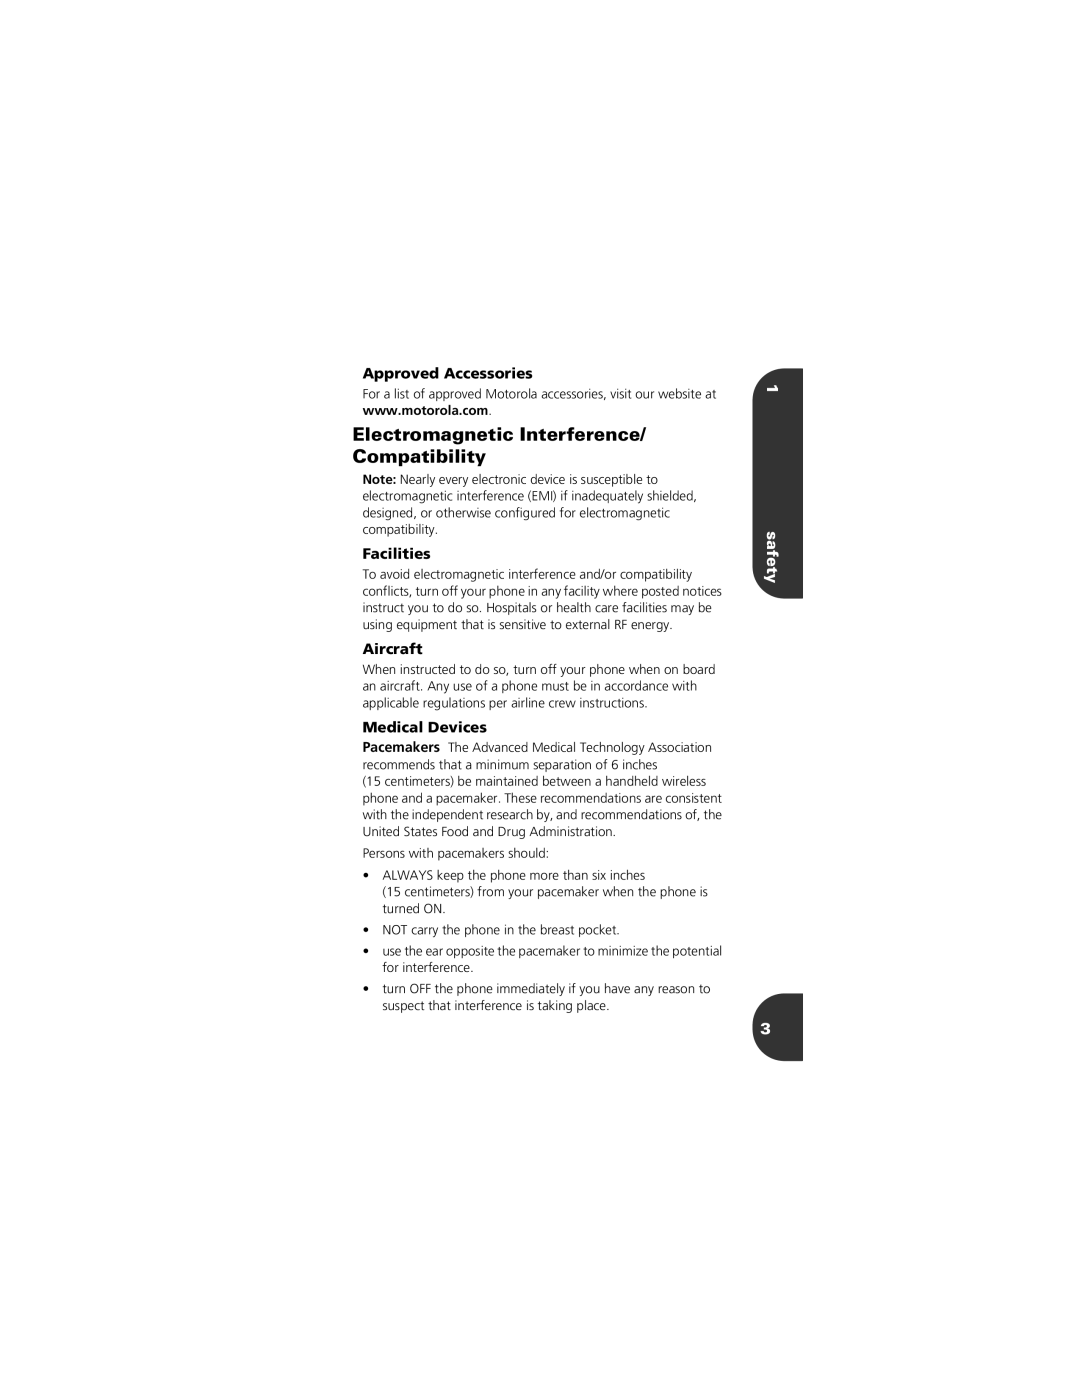 Motorola 2001 Portable Cell Phone Electromagnetic Interference/ Compatibility, Approved Accessories, Facilities, Aircraft 